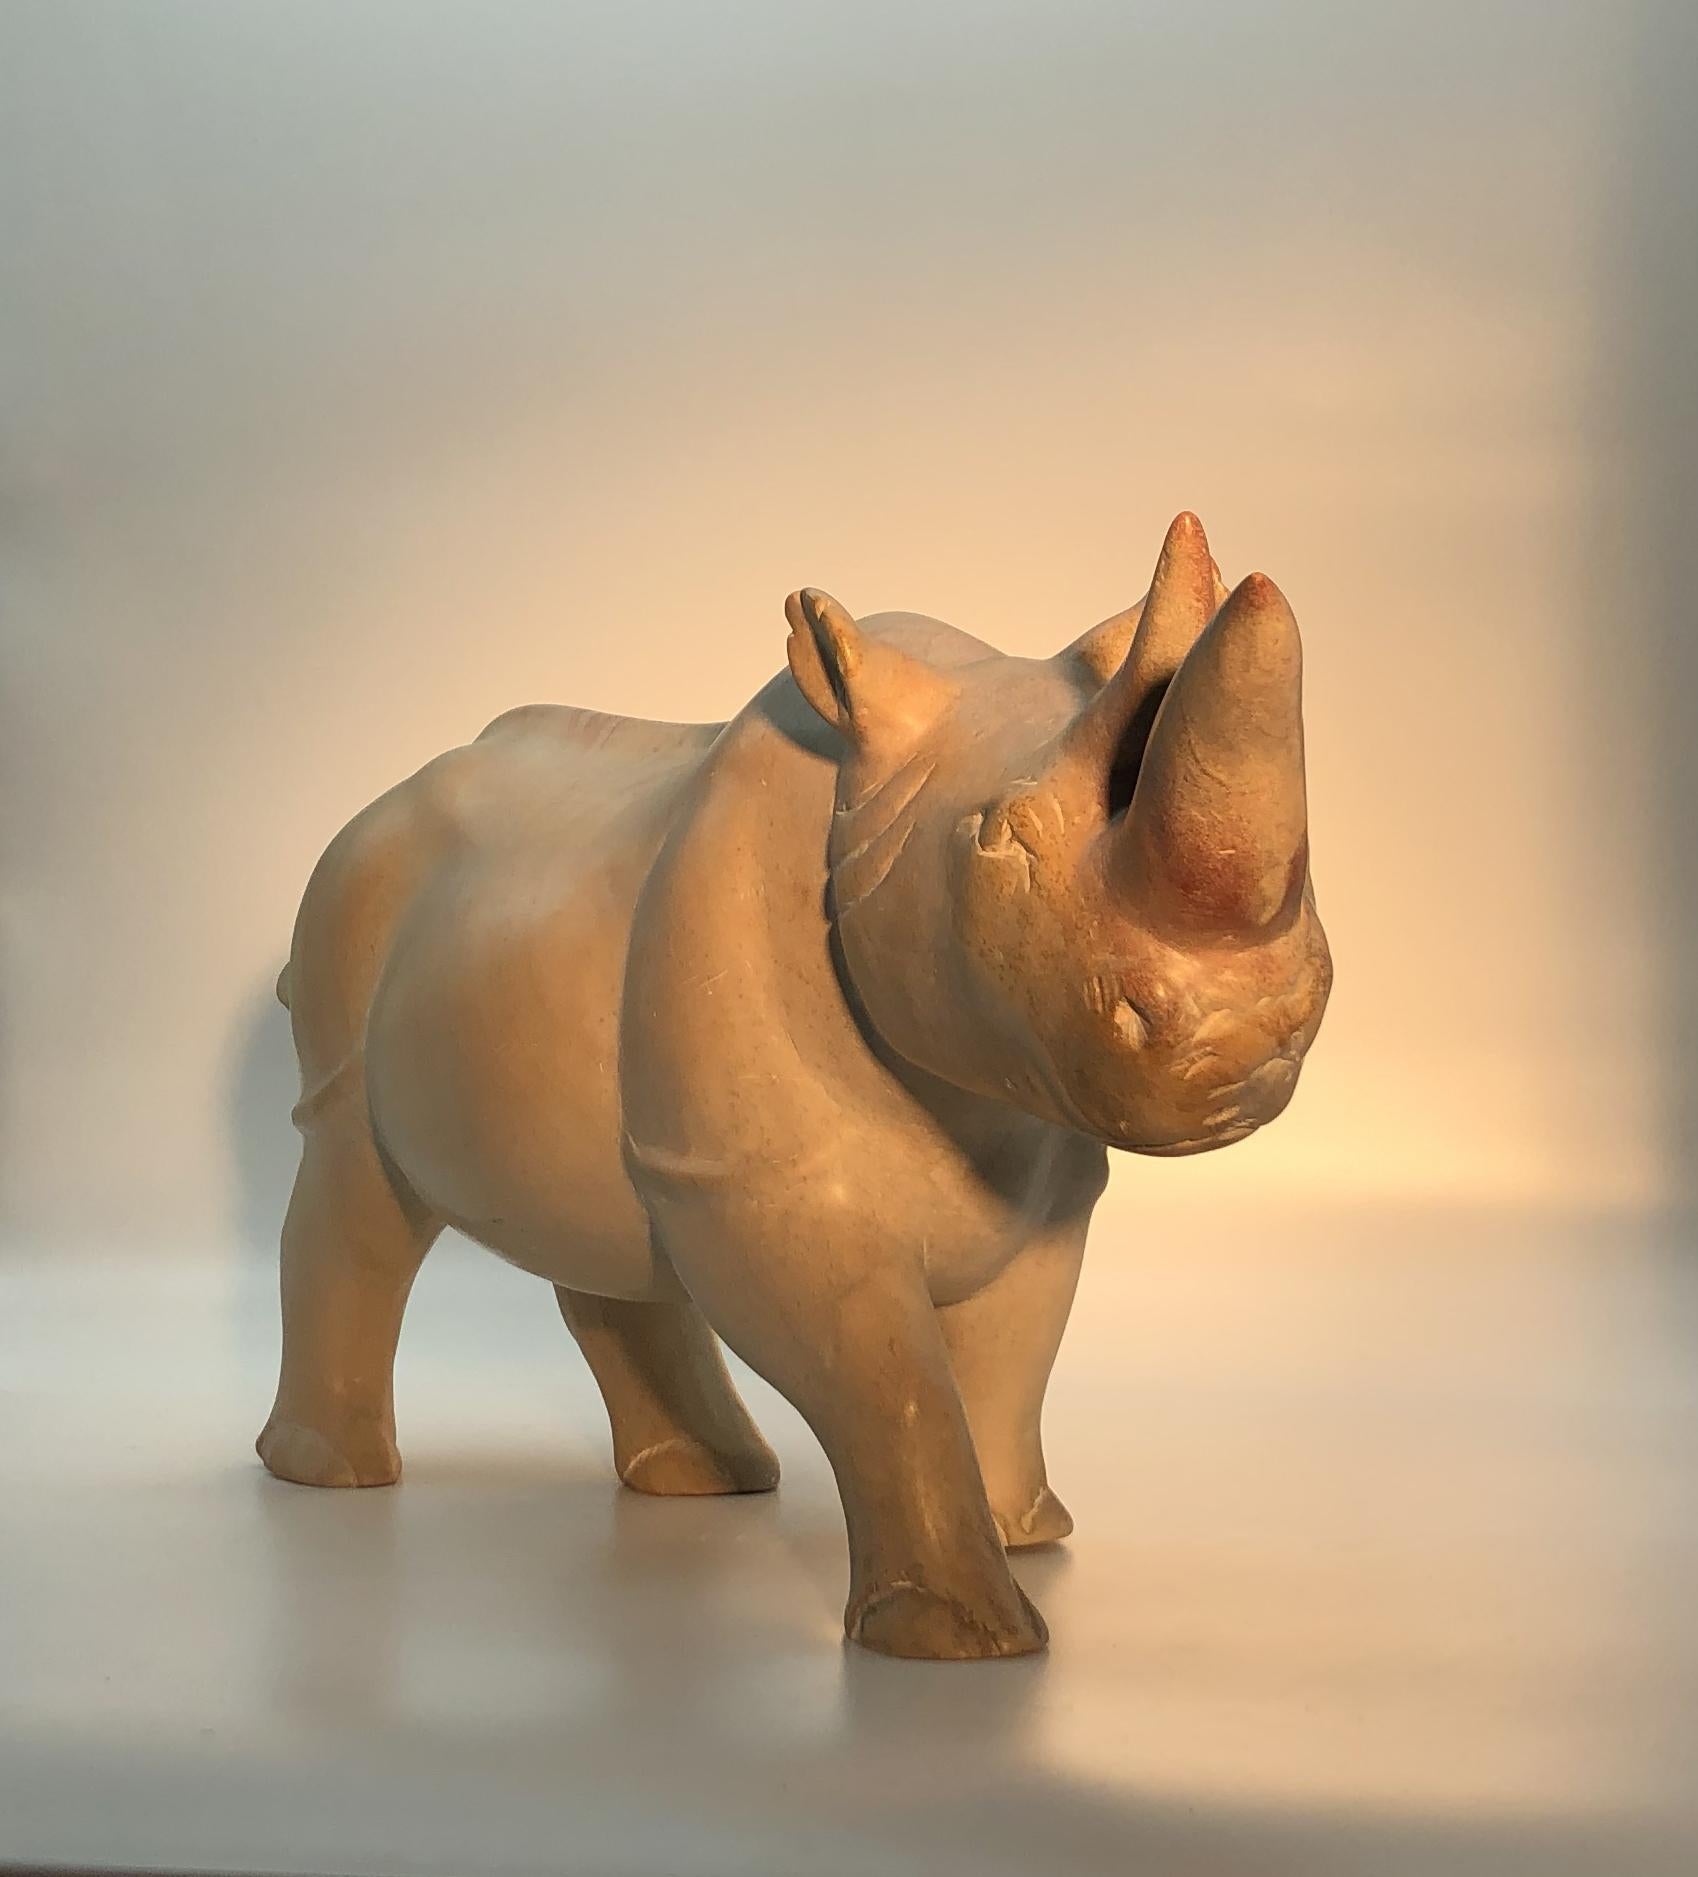 A very impressive and huge sculpture of rhinoceros, an animal that with is strong become, from the classical era a symbol of power and magnificence. In fact for example during the roman era the emperors use to represent the rhinoceros also on the